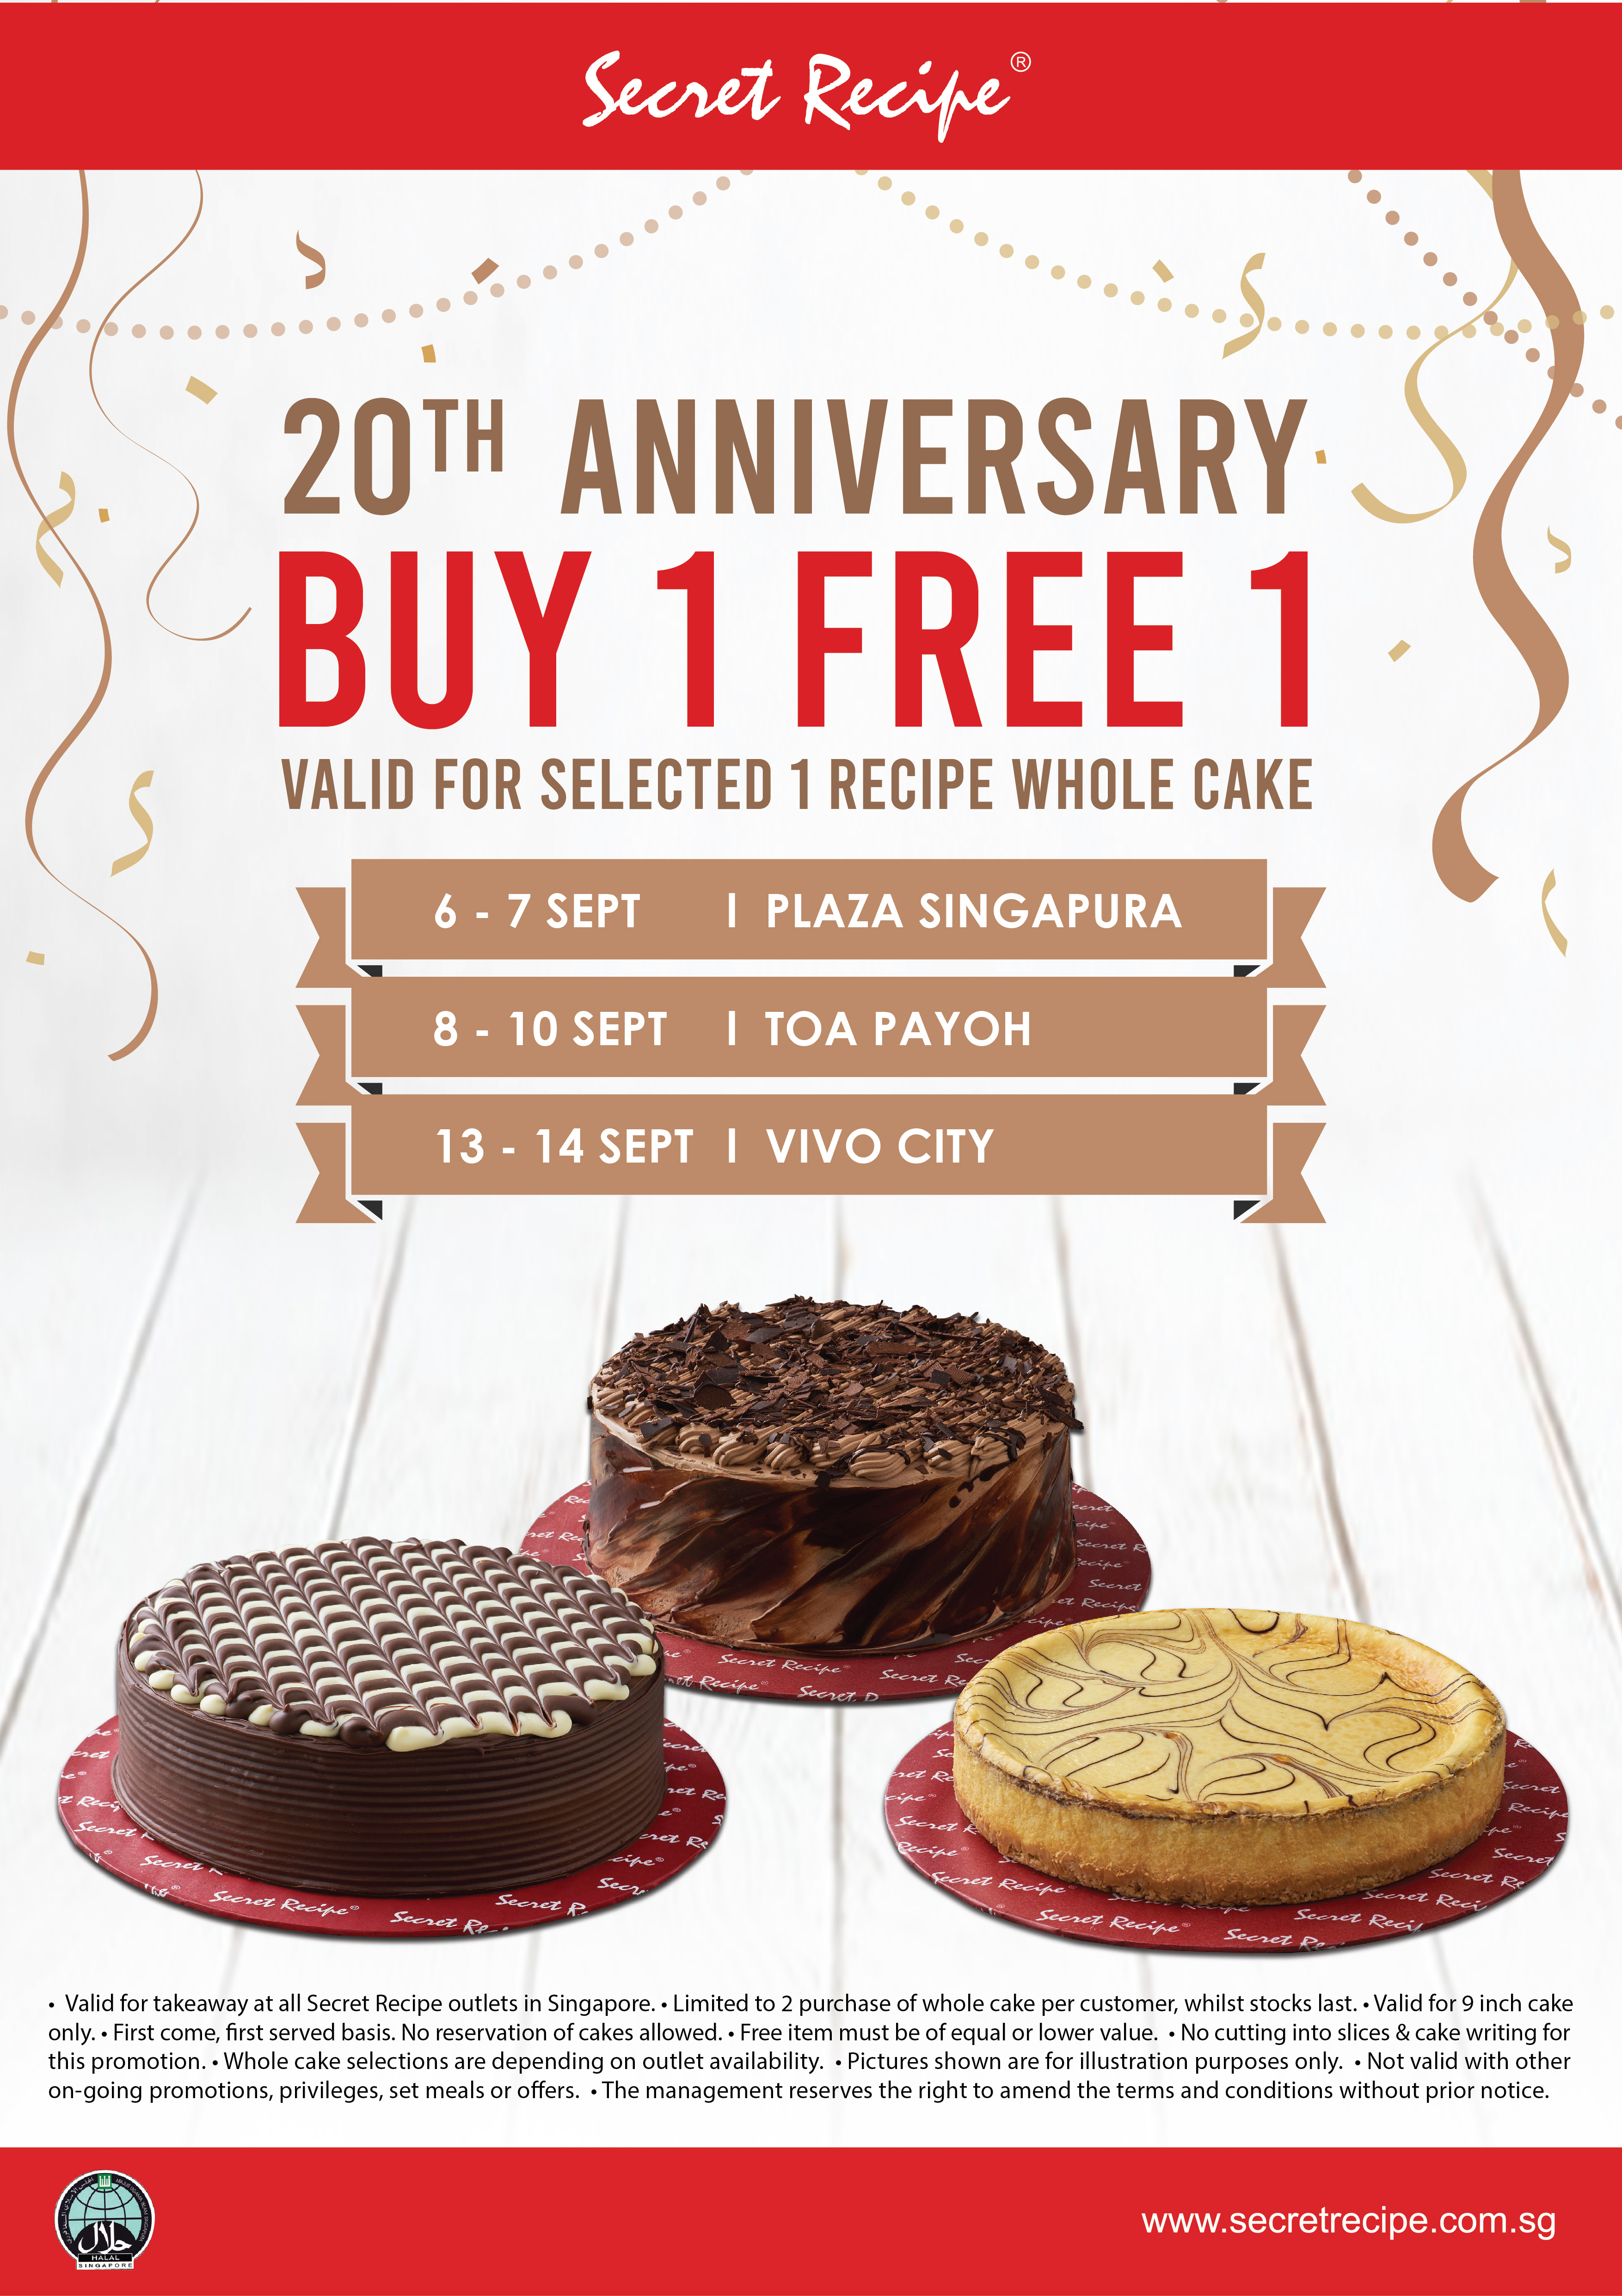 Secret Recipe celebrates 20th anniversary with 1-for-1 Whole Cakes promotion from 6 – 7 Sep 19 - 1